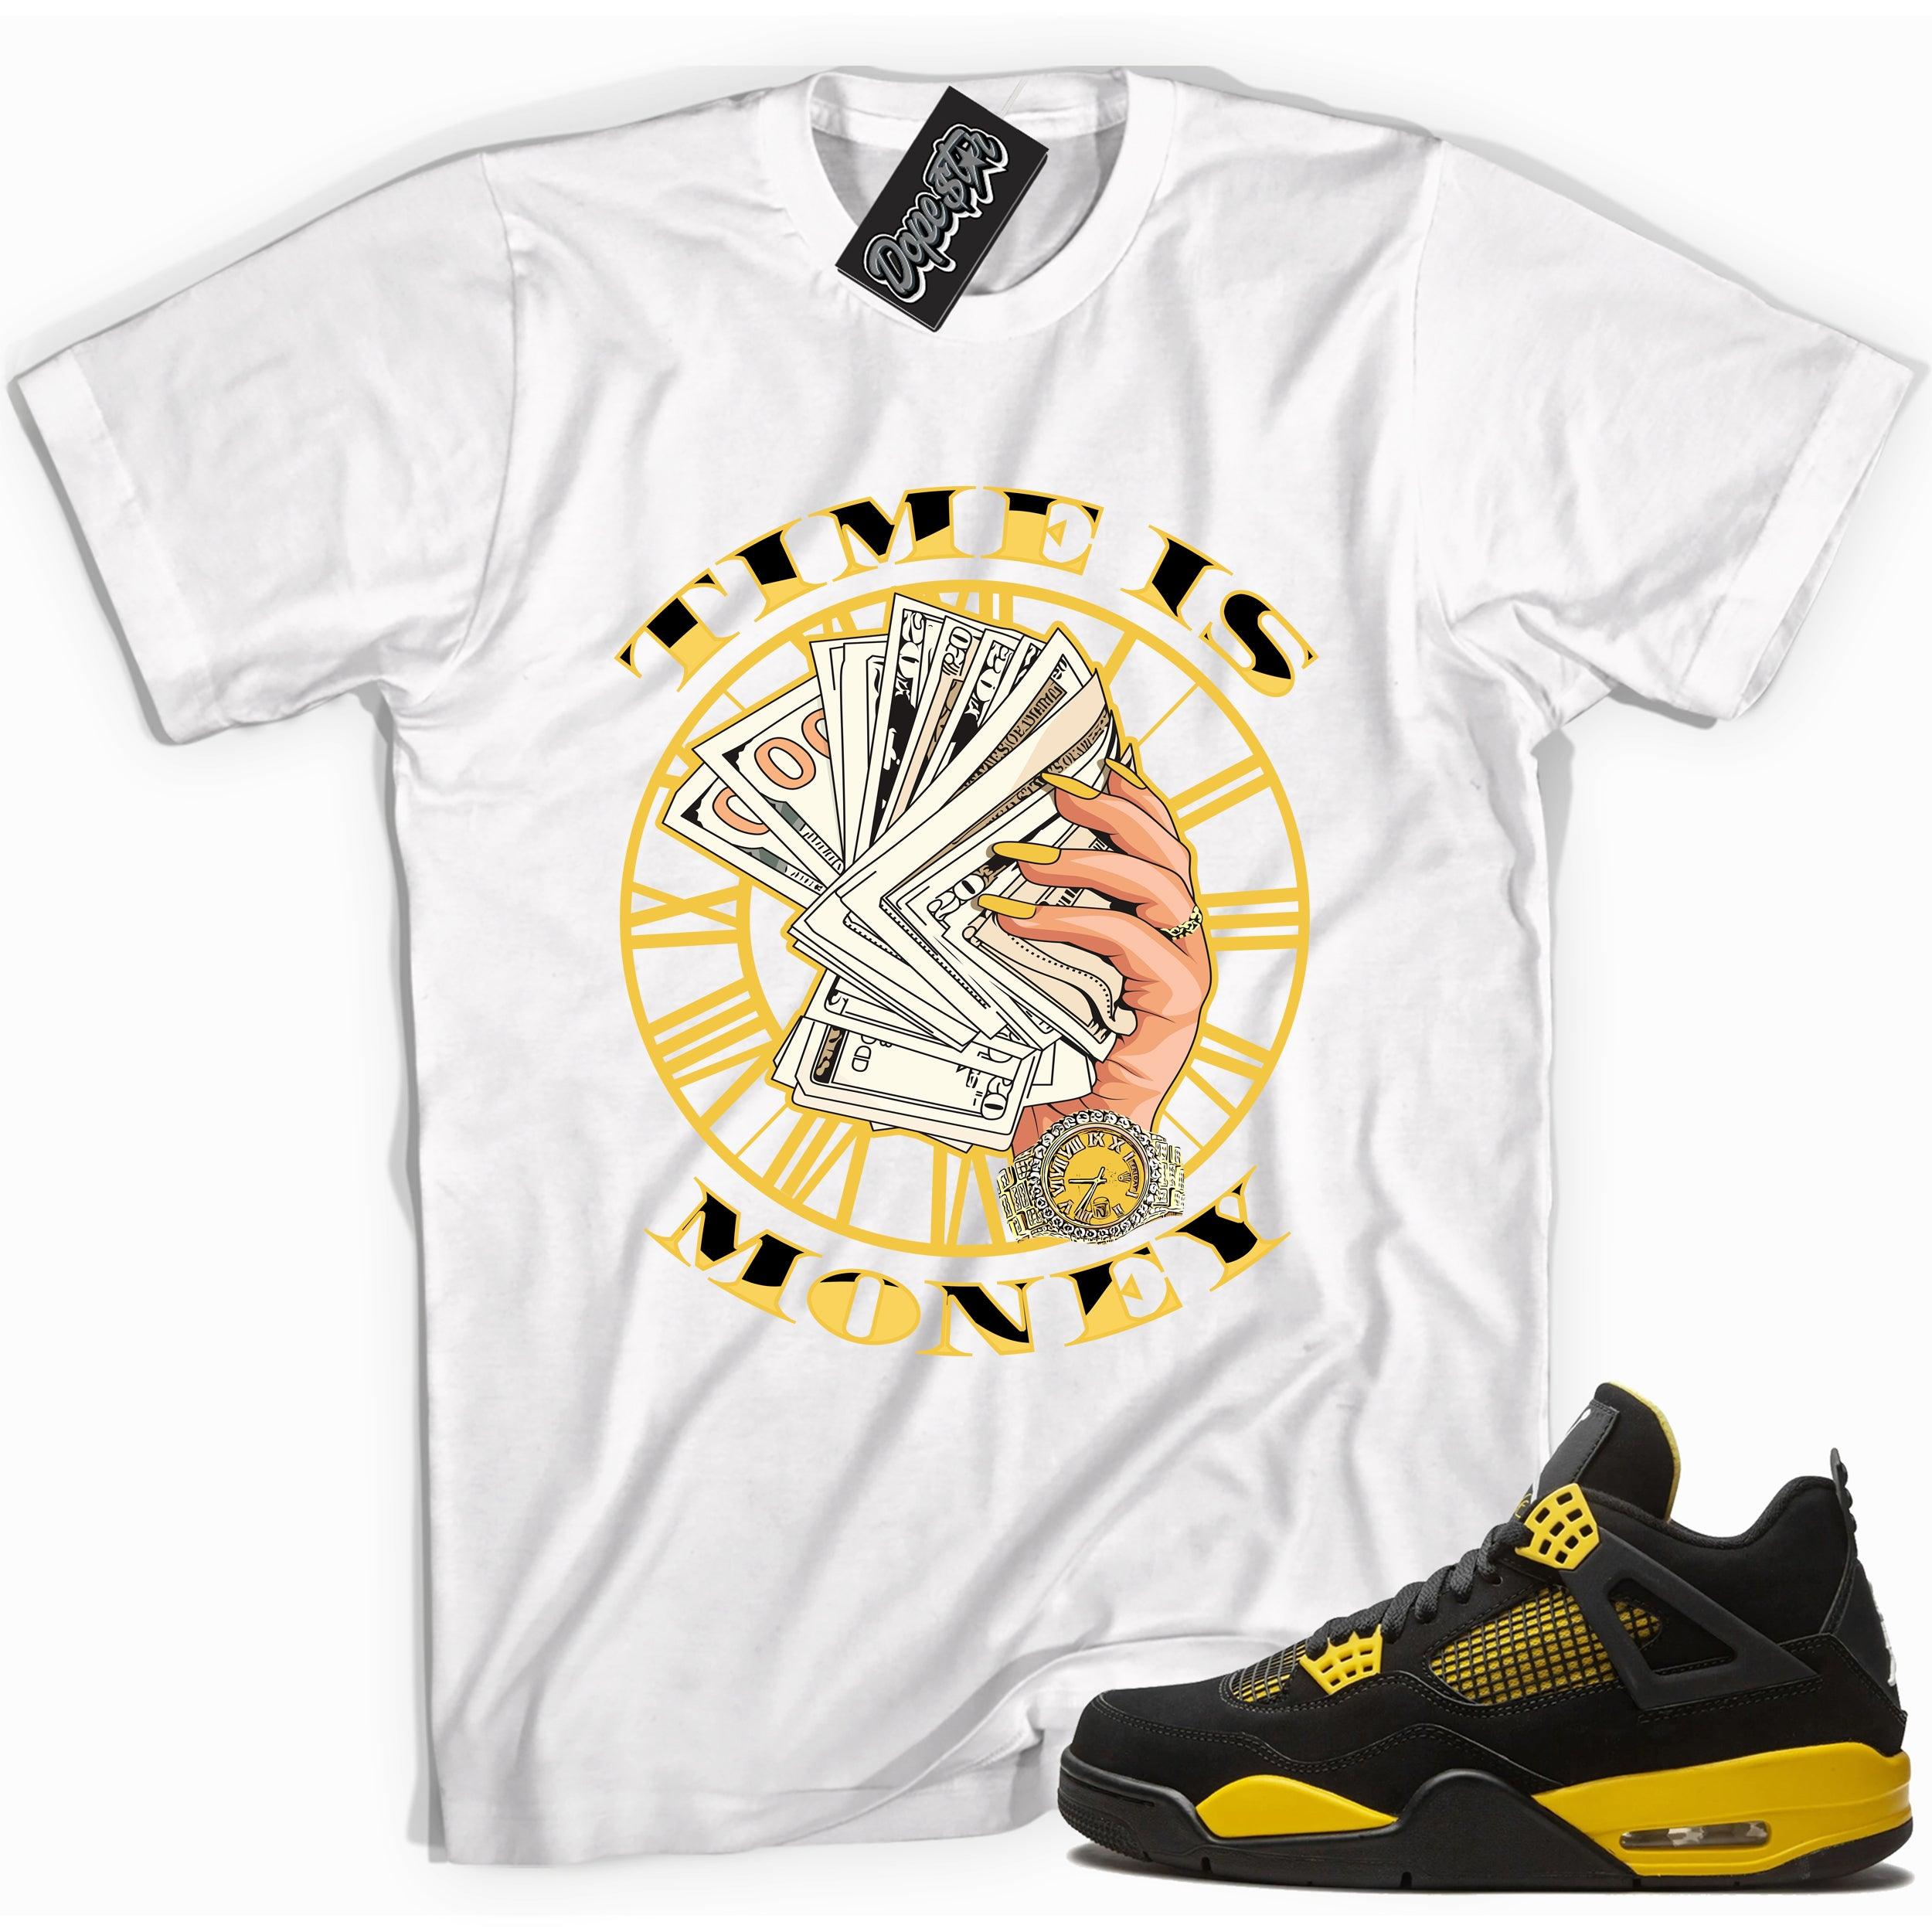 Cool white graphic tee with 'time is money' print, that perfectly matches Air Jordan 4 Thunder sneakers